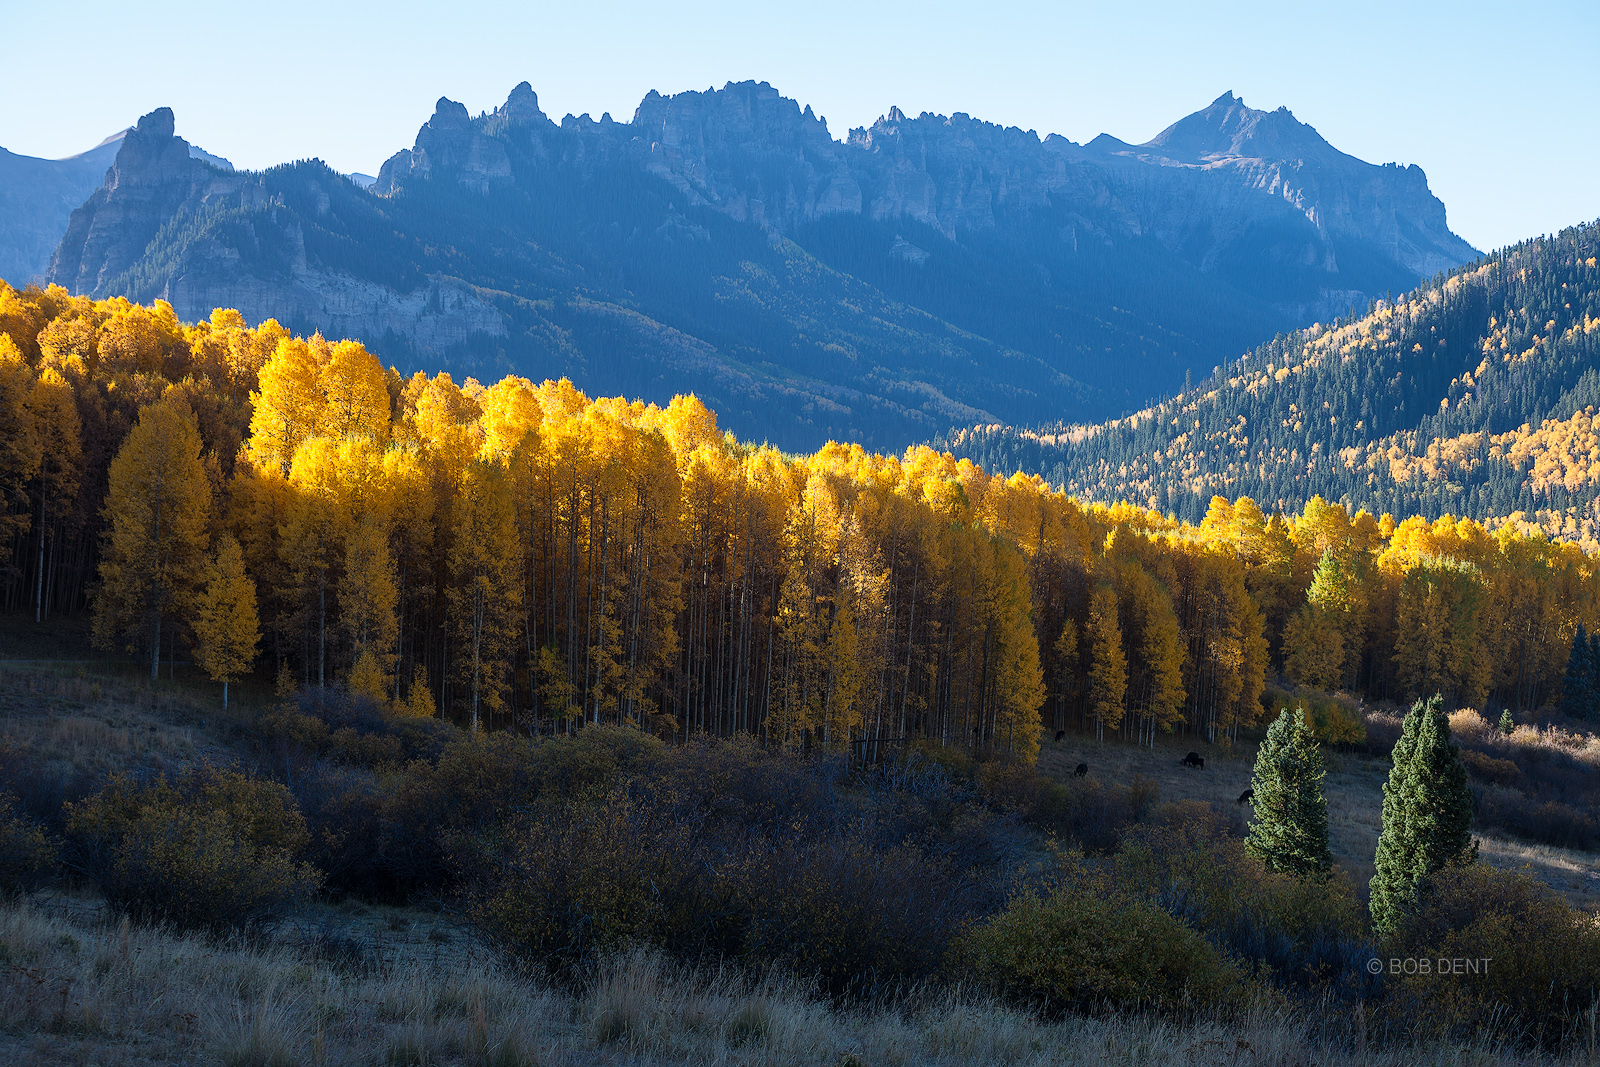 Sunrise light below Courthouse Mountain on a cold autumn morning.